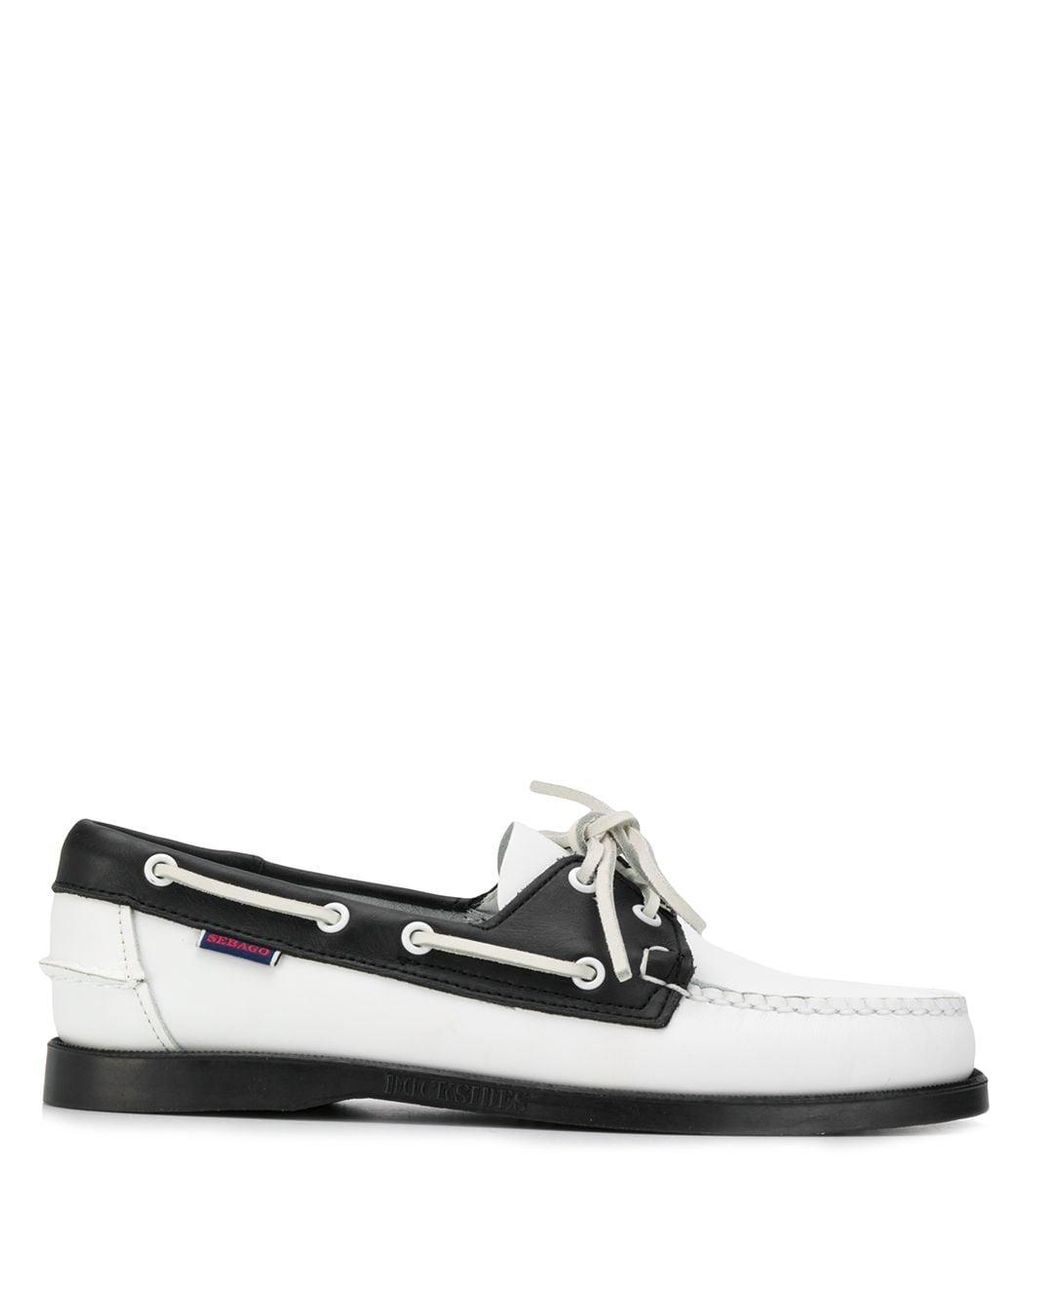 Sebago Leather Two Tone Boat Shoes in White for Men - Lyst